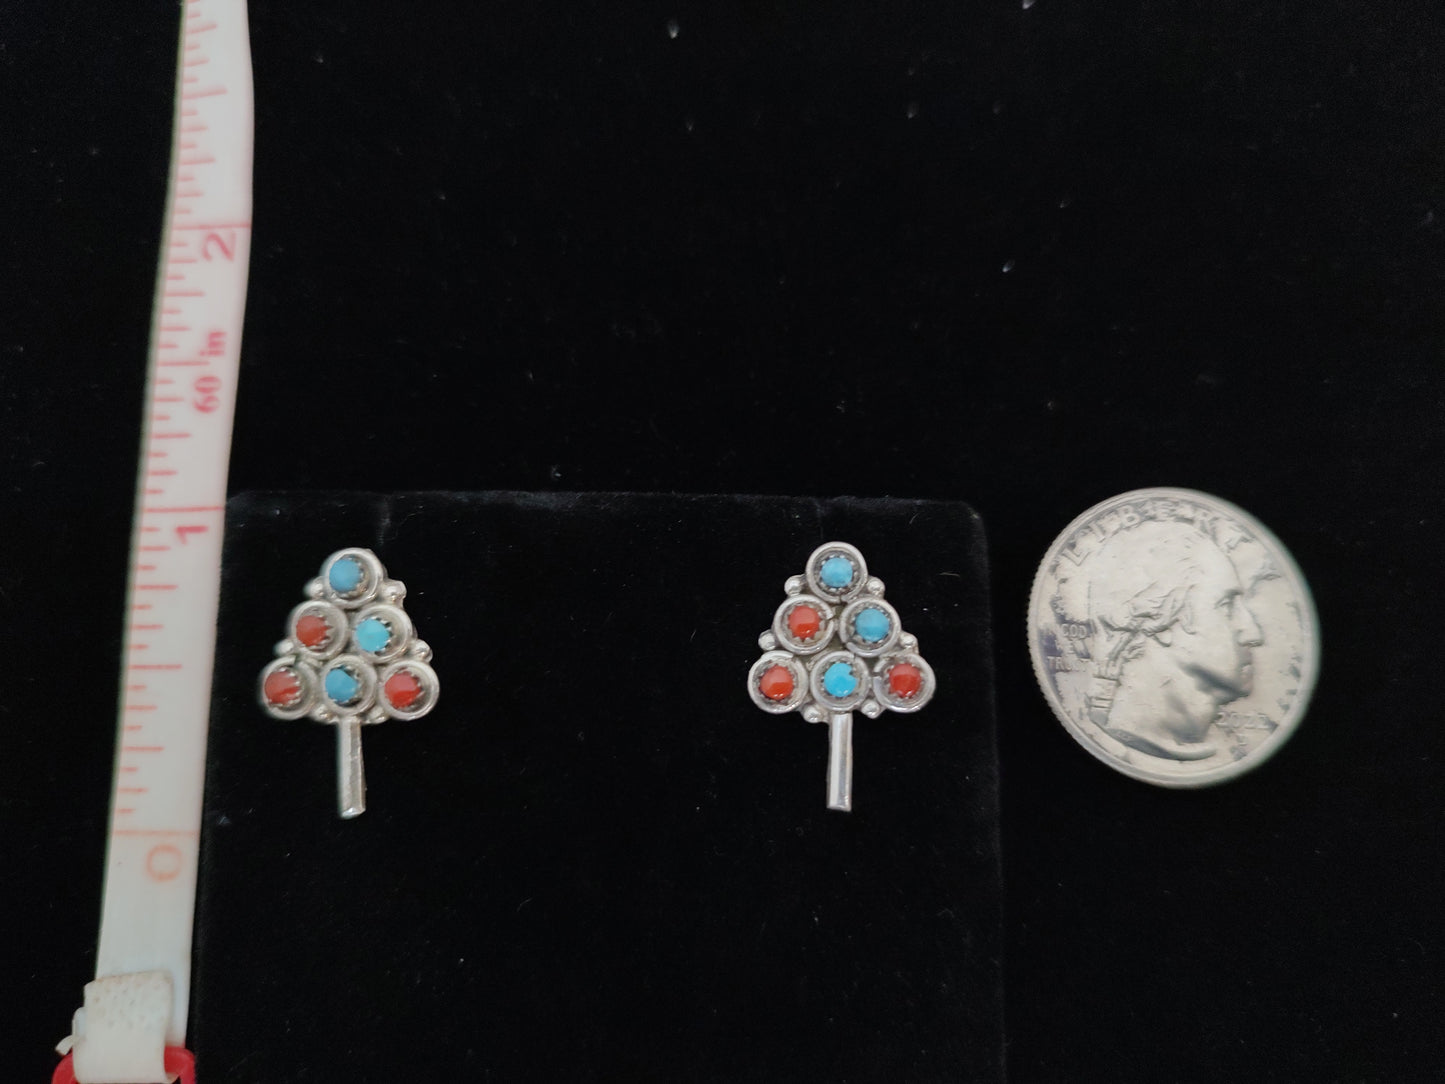 Sleeping Beauty Turquoise and Coral Post Earrings